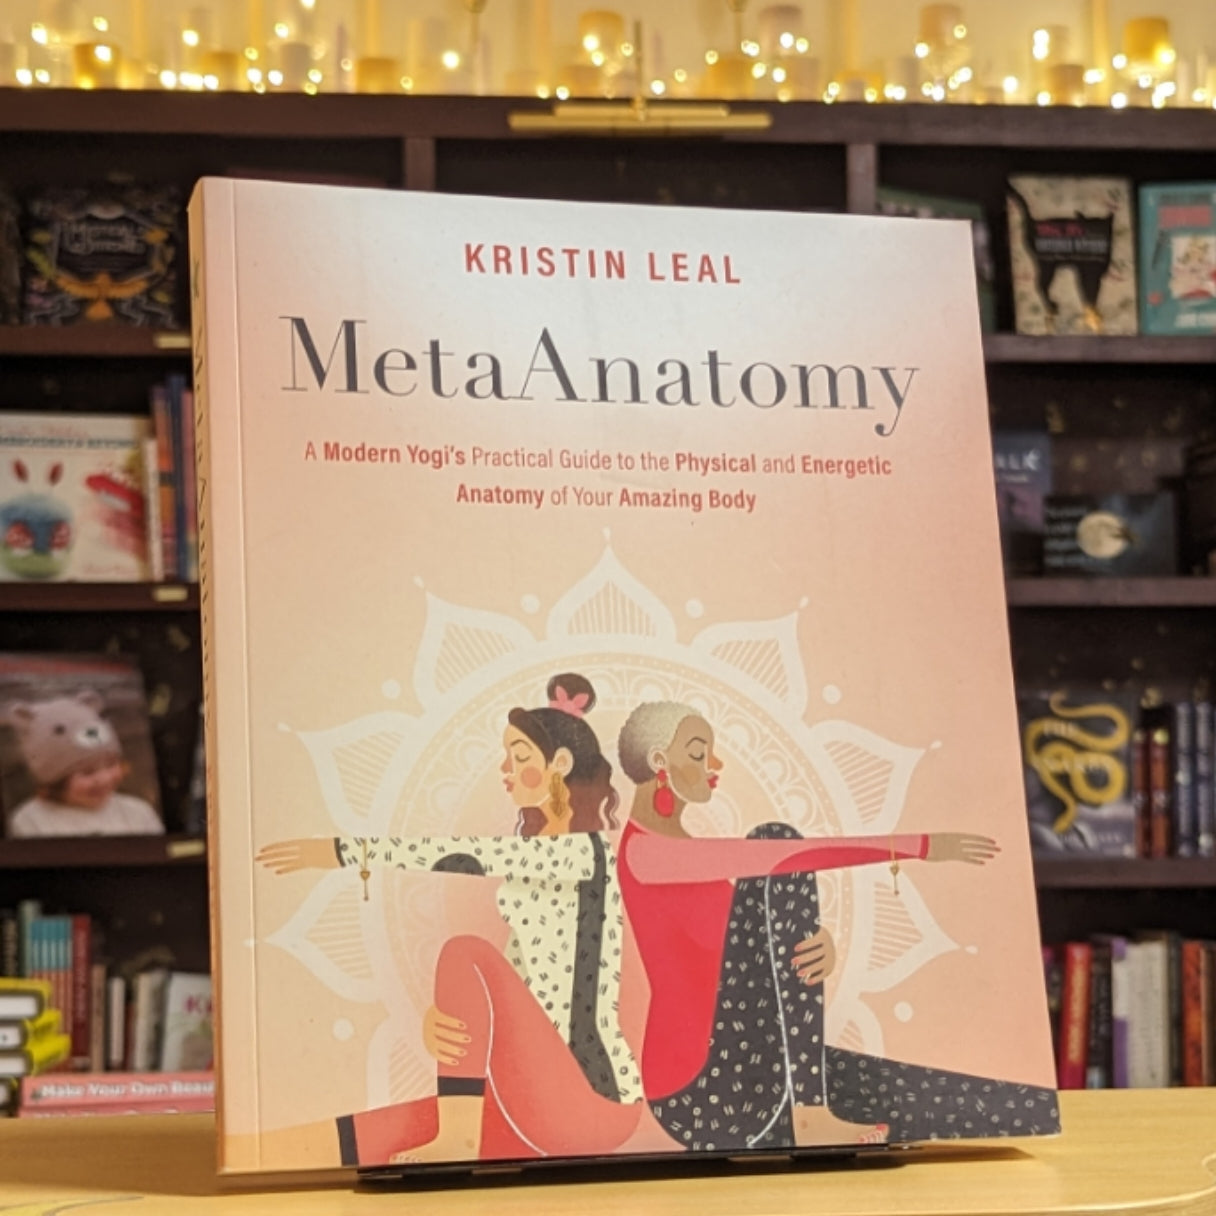 MetaAnatomy: A Modern Yogi's Practical Guide to the Physical and Energetic Anatomy of Your Amazing Body